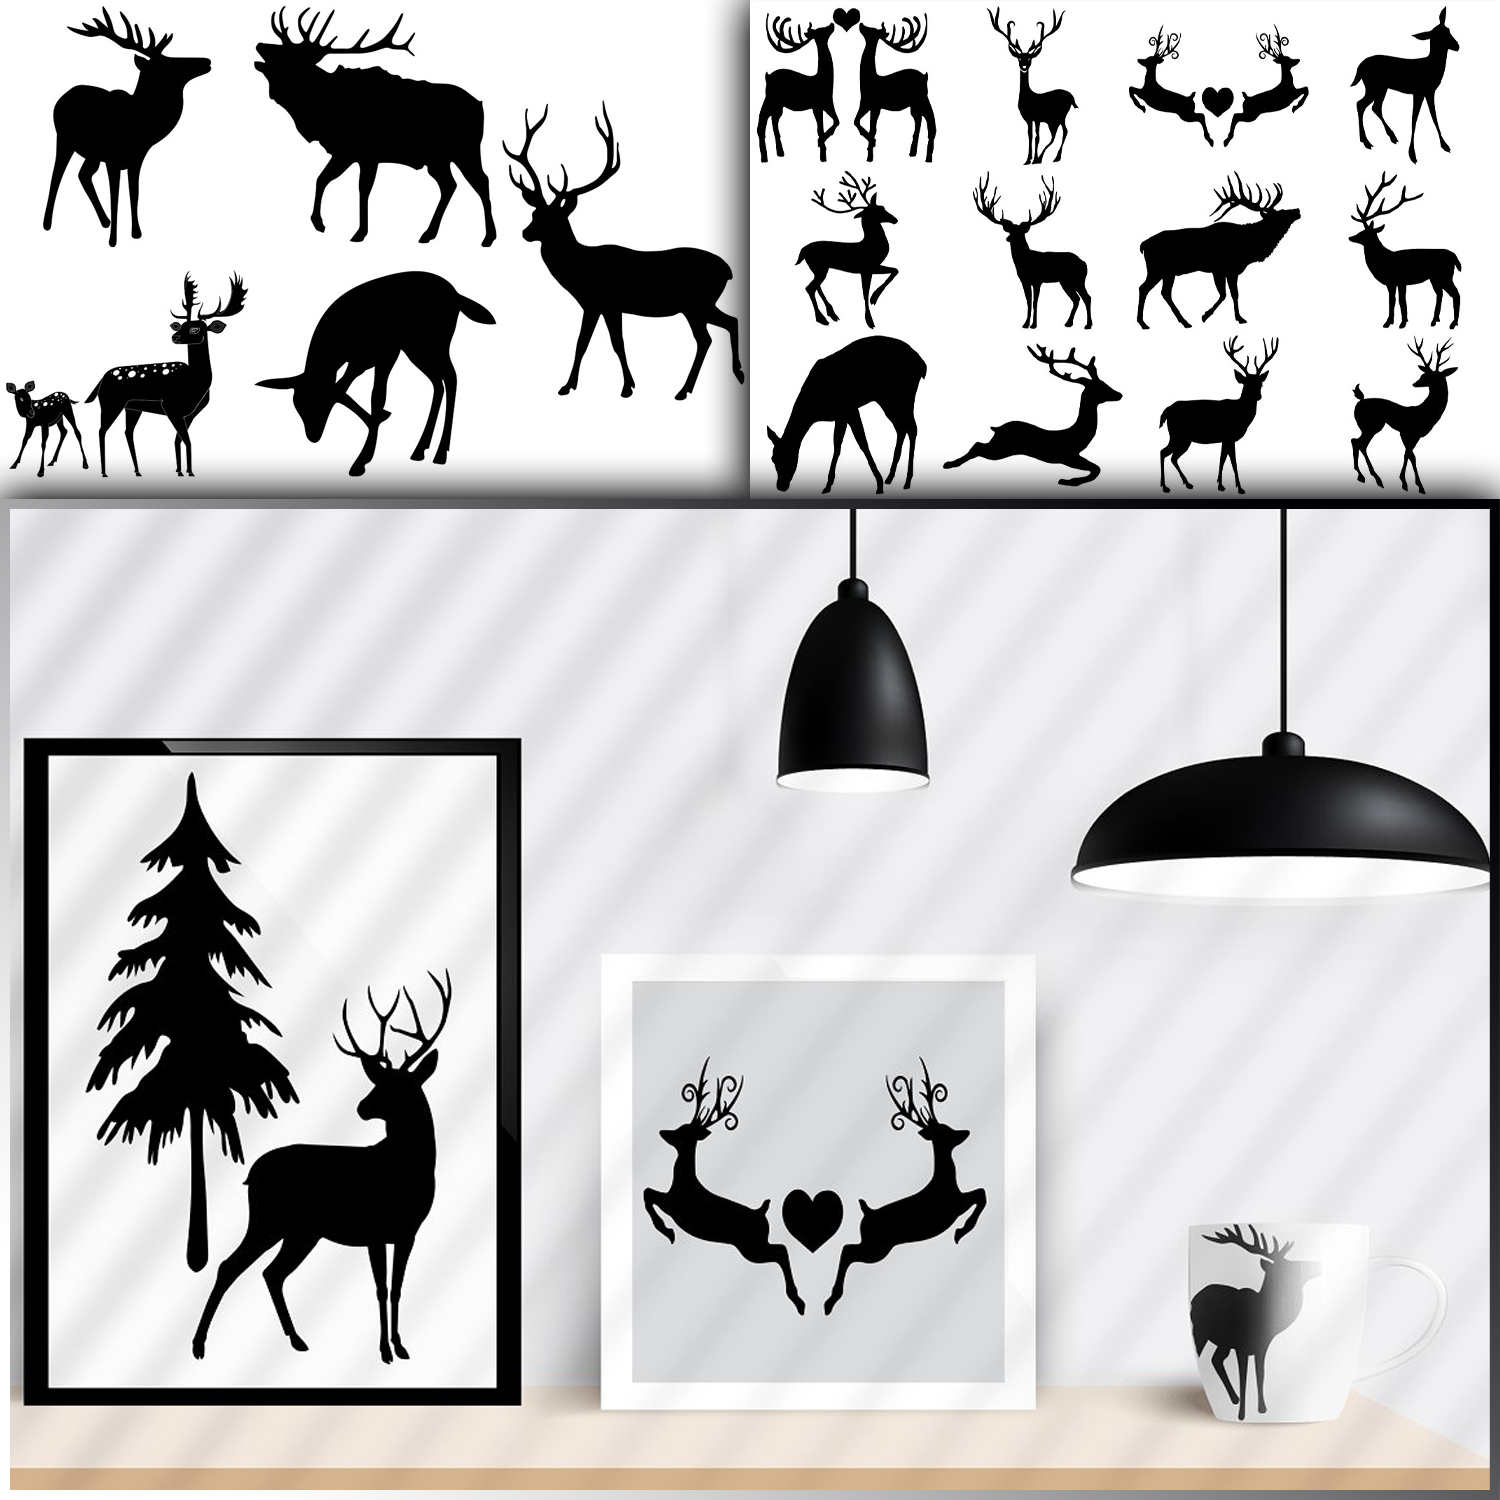 Deer,Forest,AntlerAnimals AI EPS PNG cover.